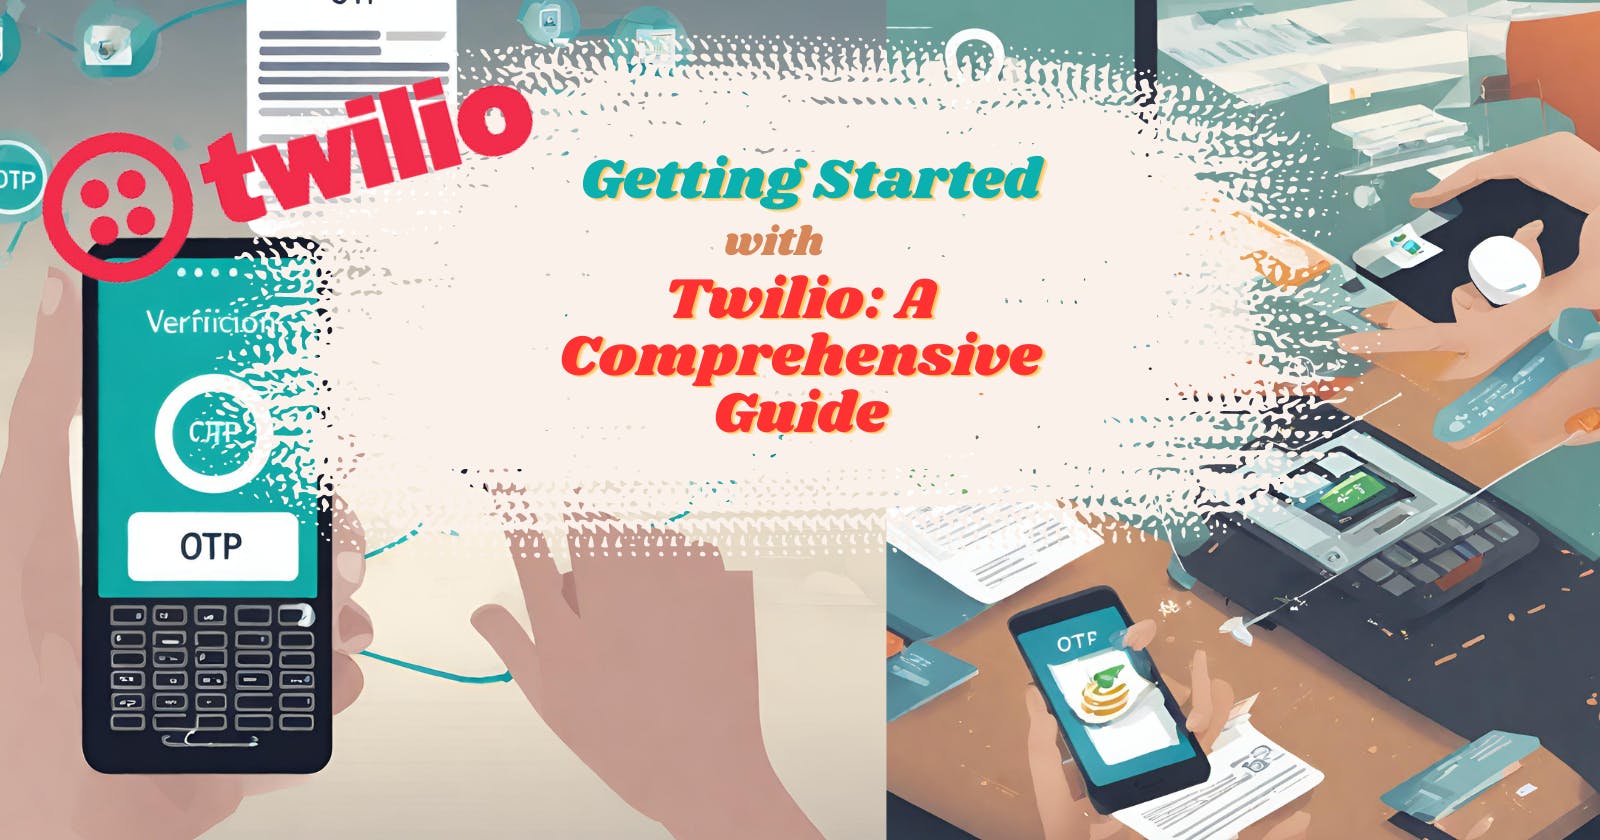 Getting Started with Twilio: A Comprehensive Guide